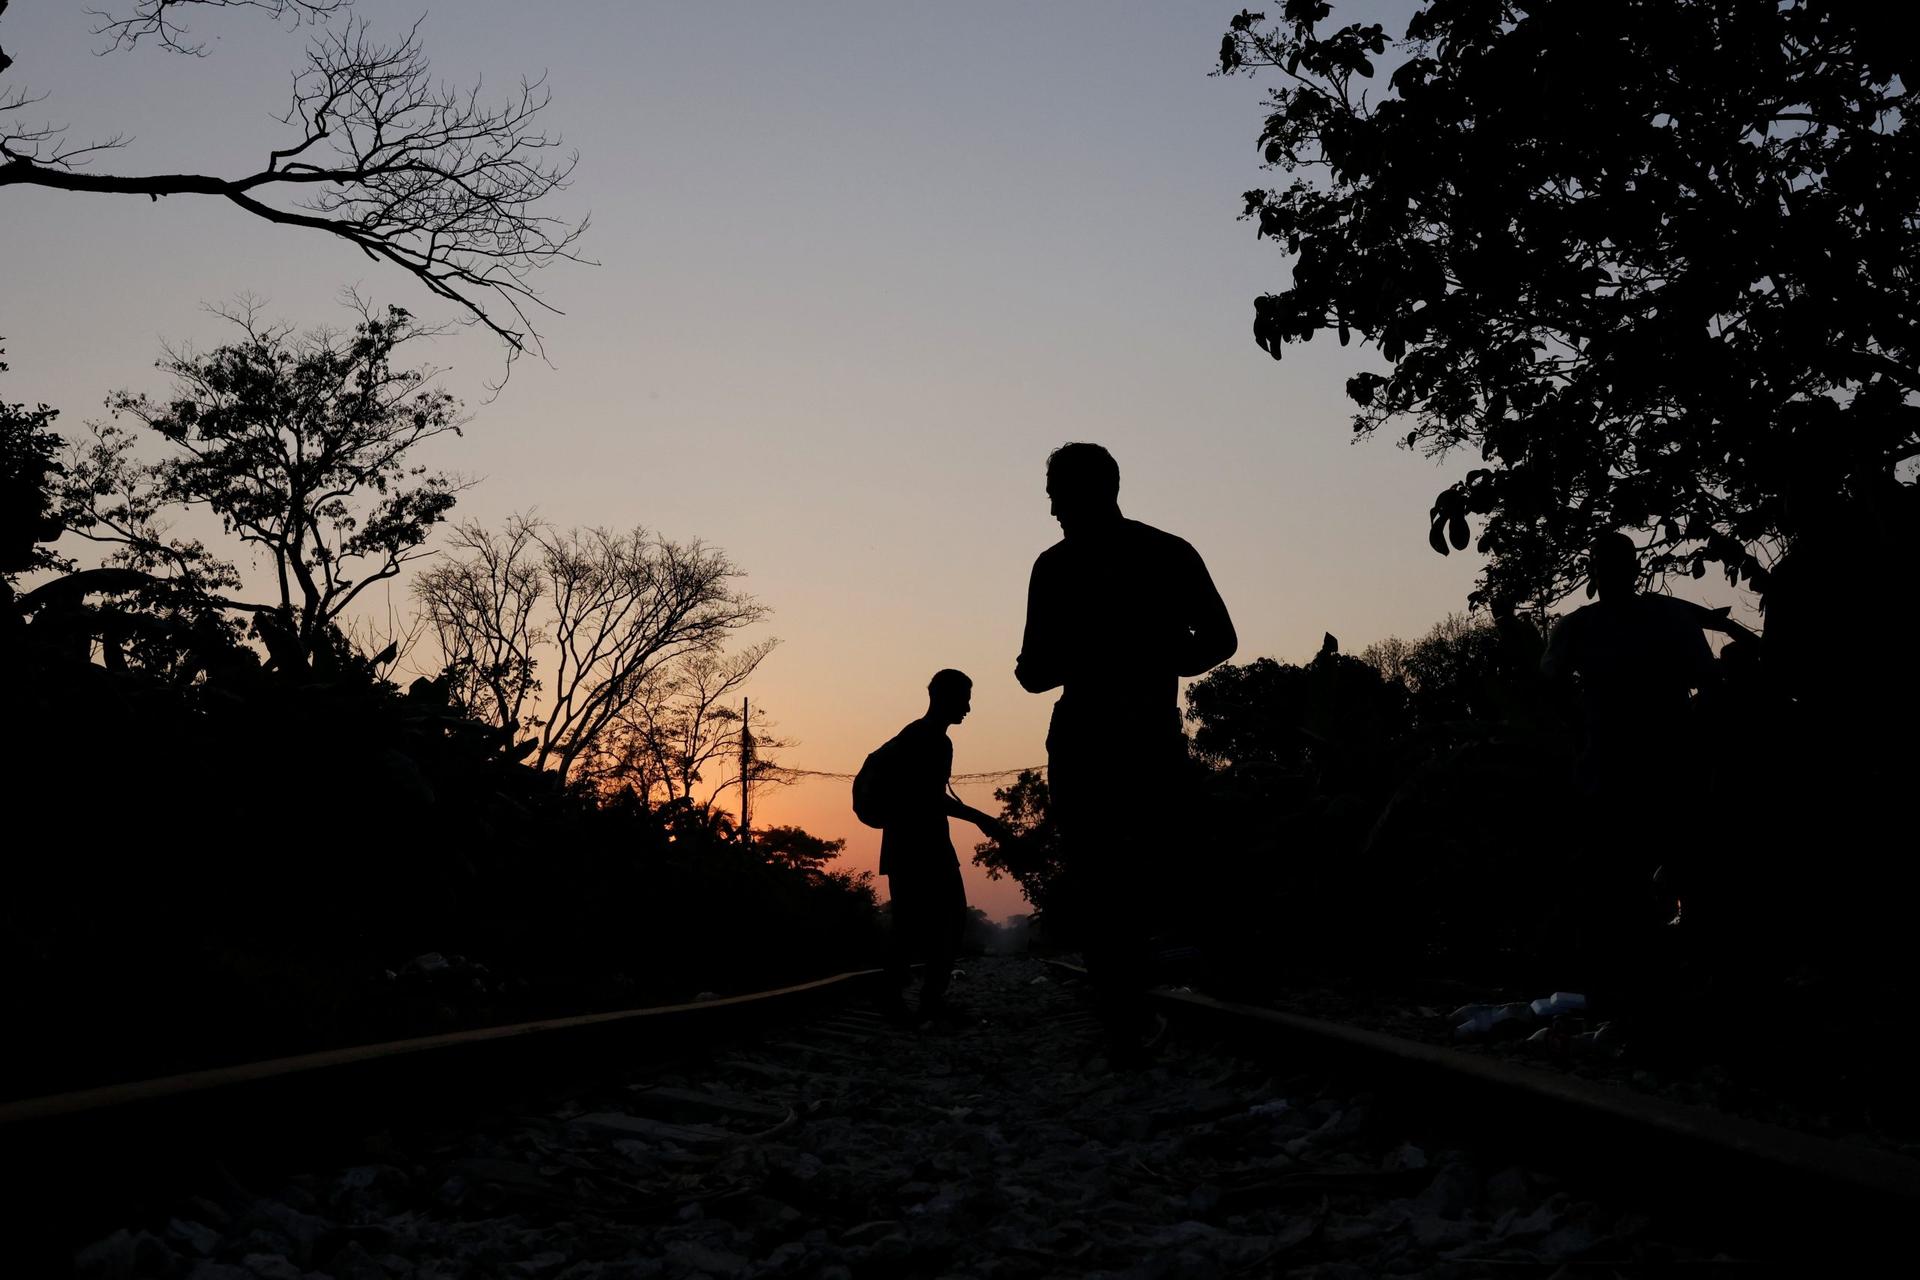 Chasing a dream because of a rumor, some Central Americans head to border